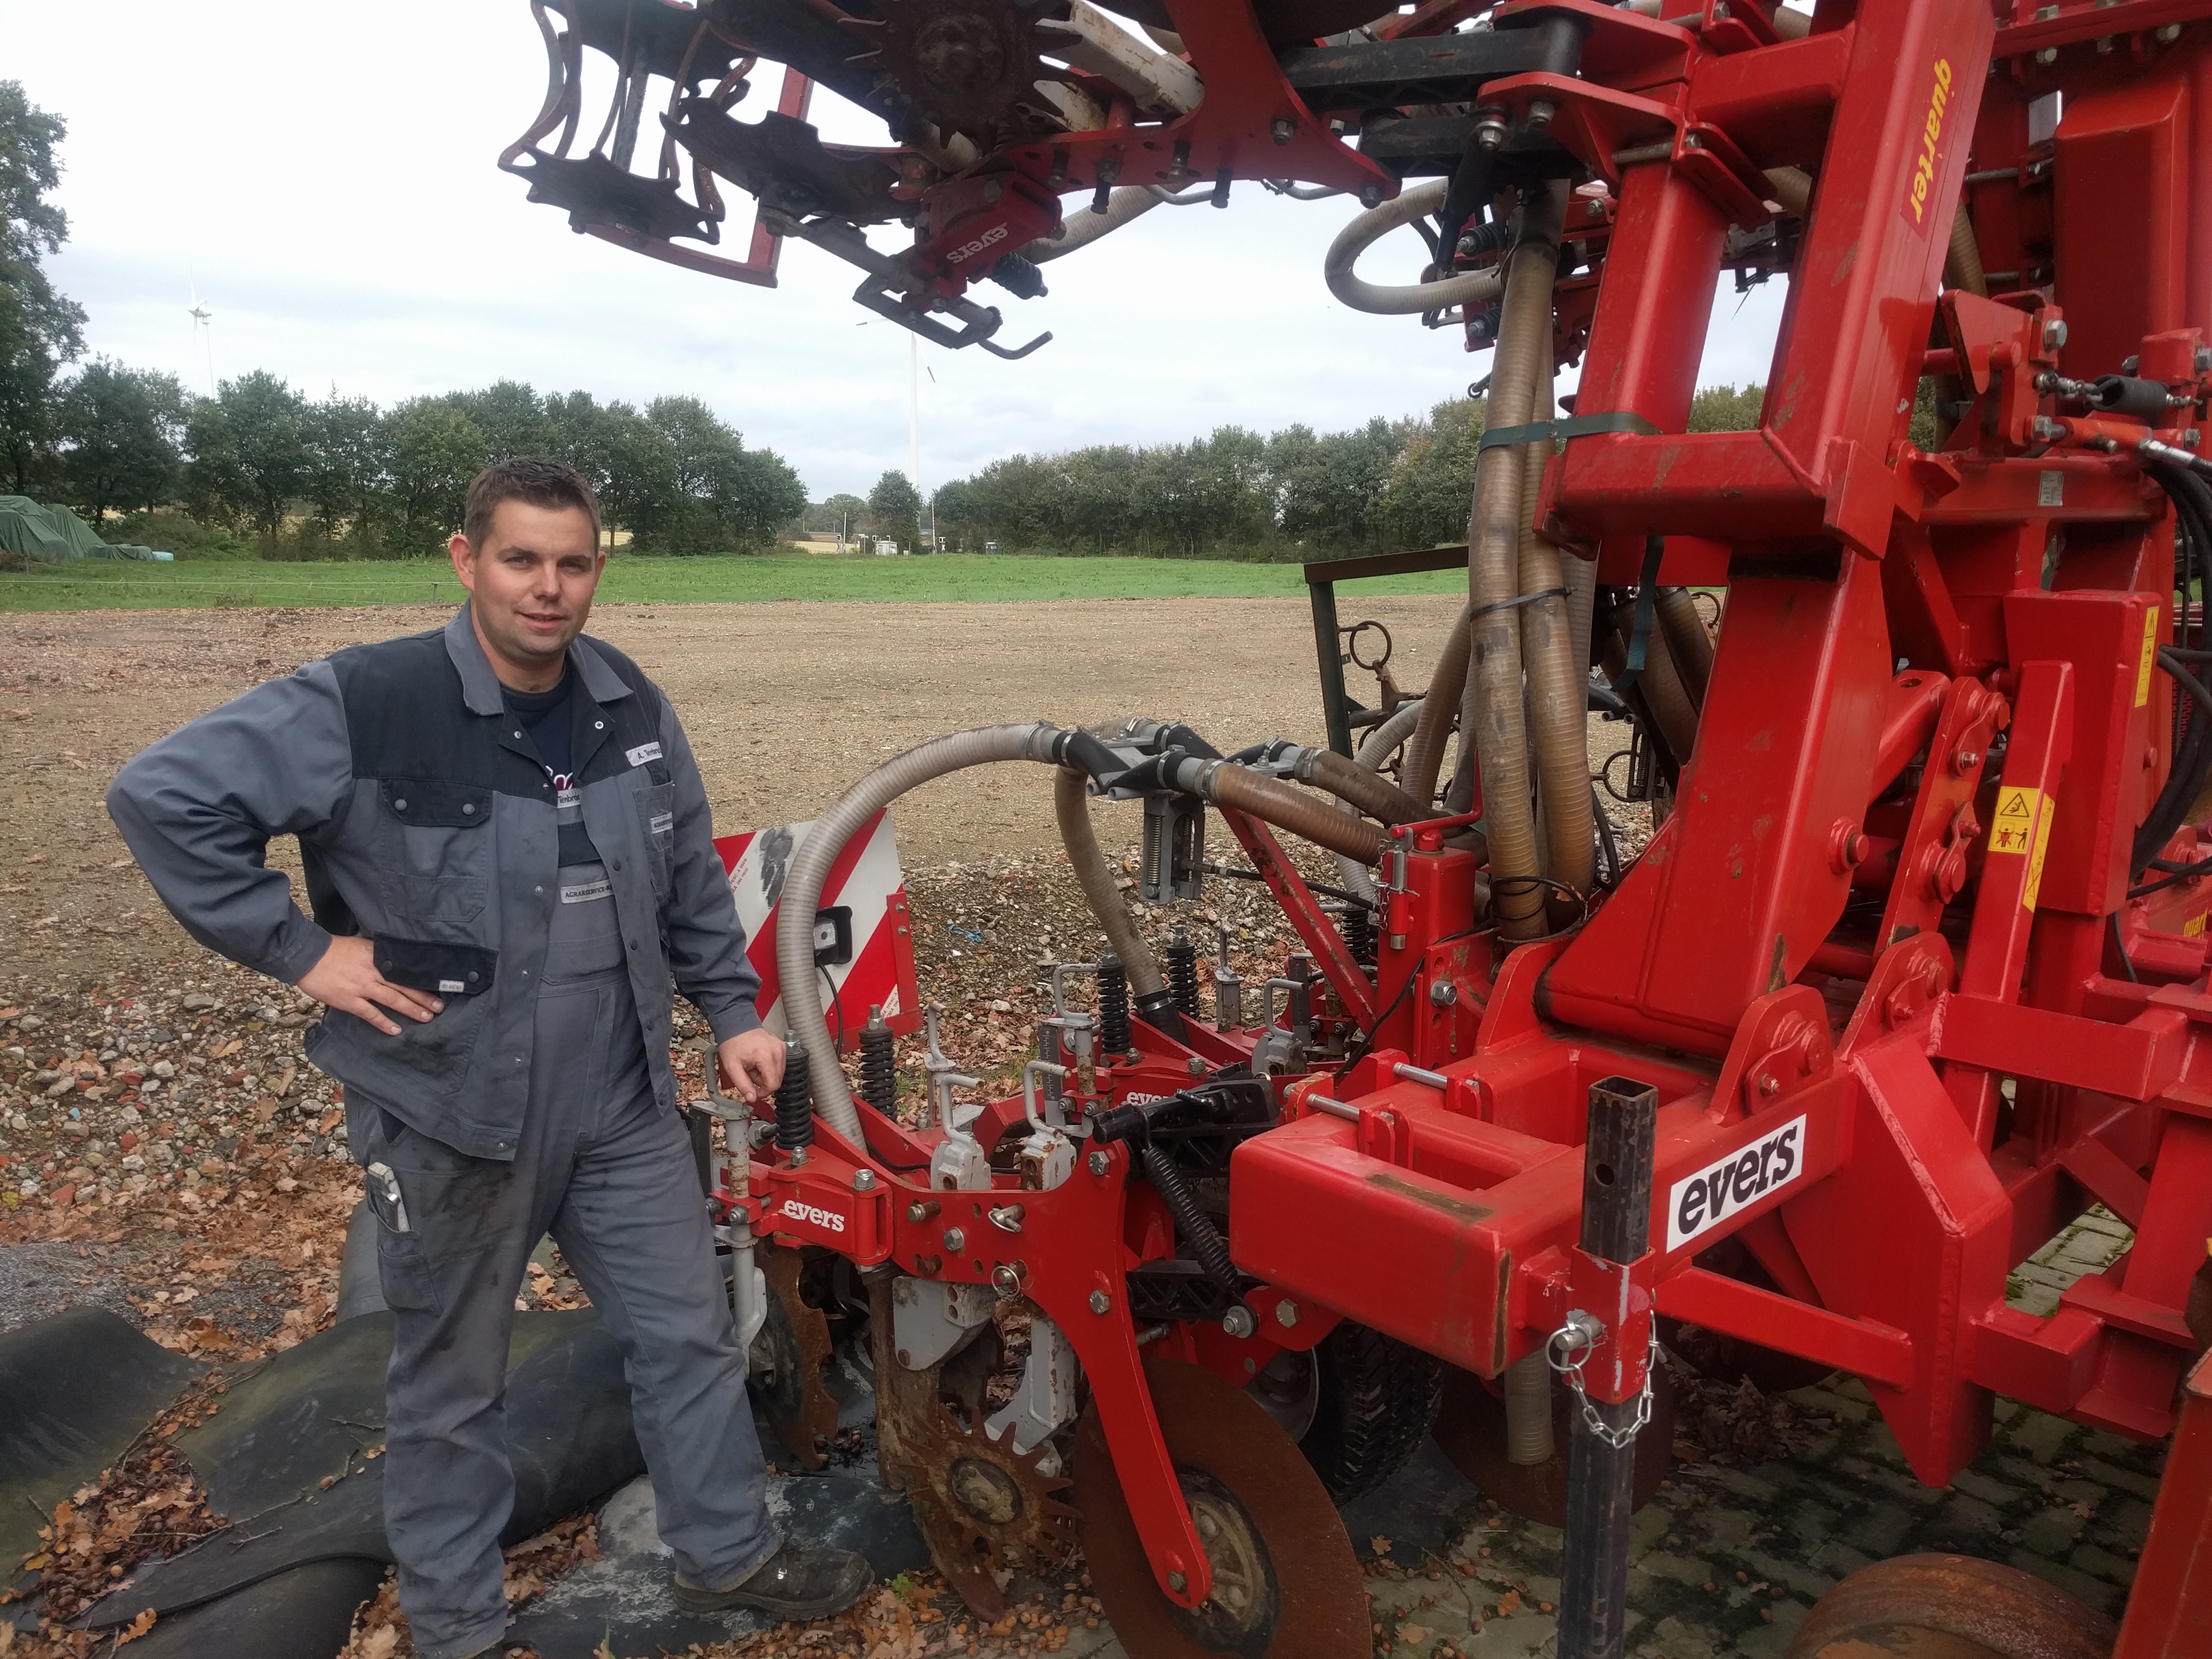 Agrarservice Reken Germany opted for Evers Strp-till injector to offer their customers the best possible technique